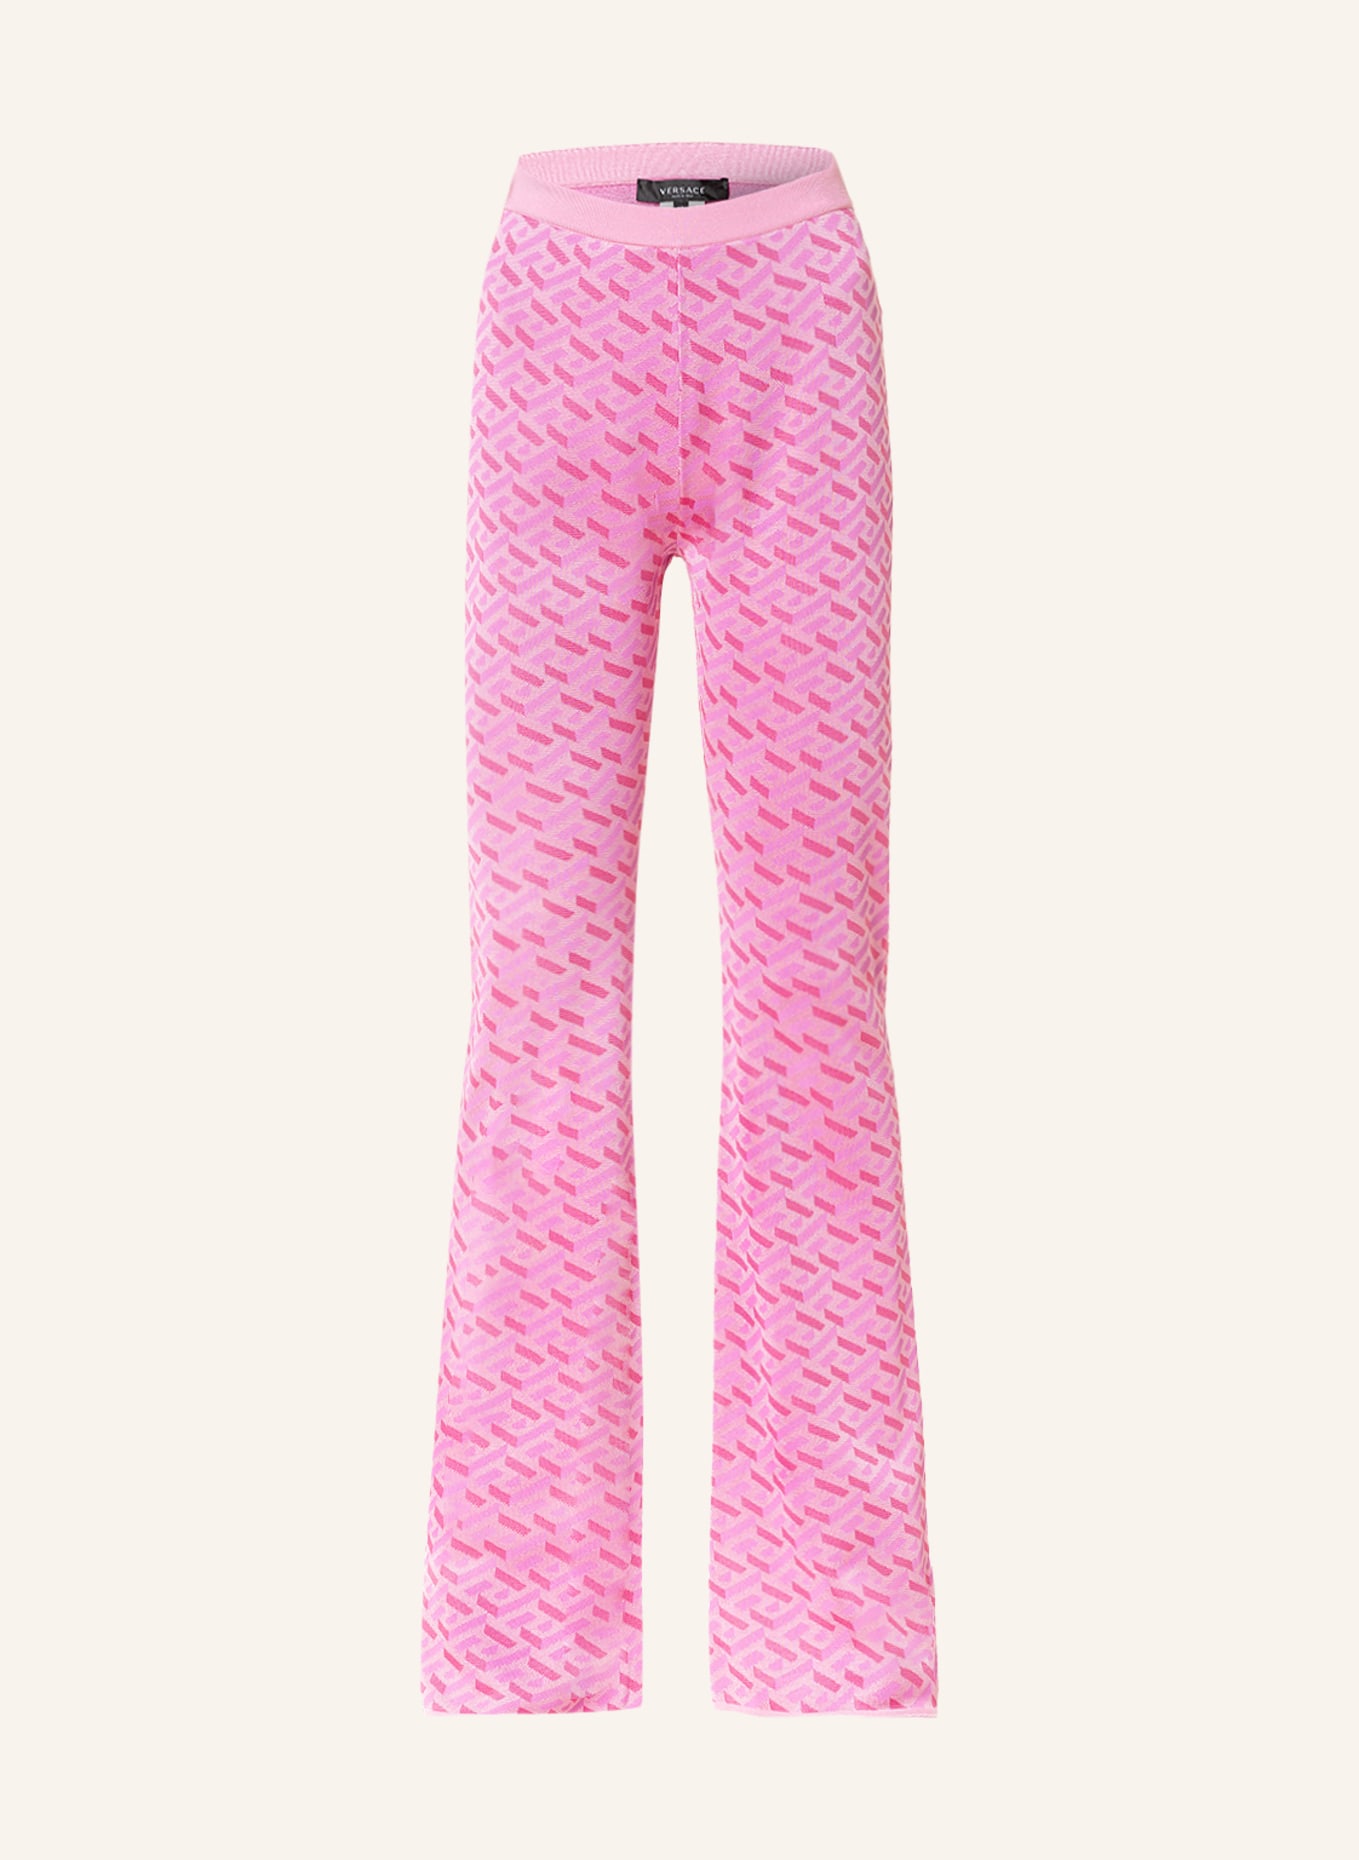 VERSACE Knit trousers LA GRECA with silk, Color: PINK/ FUCHSIA/ LIGHT PINK (Image 1)